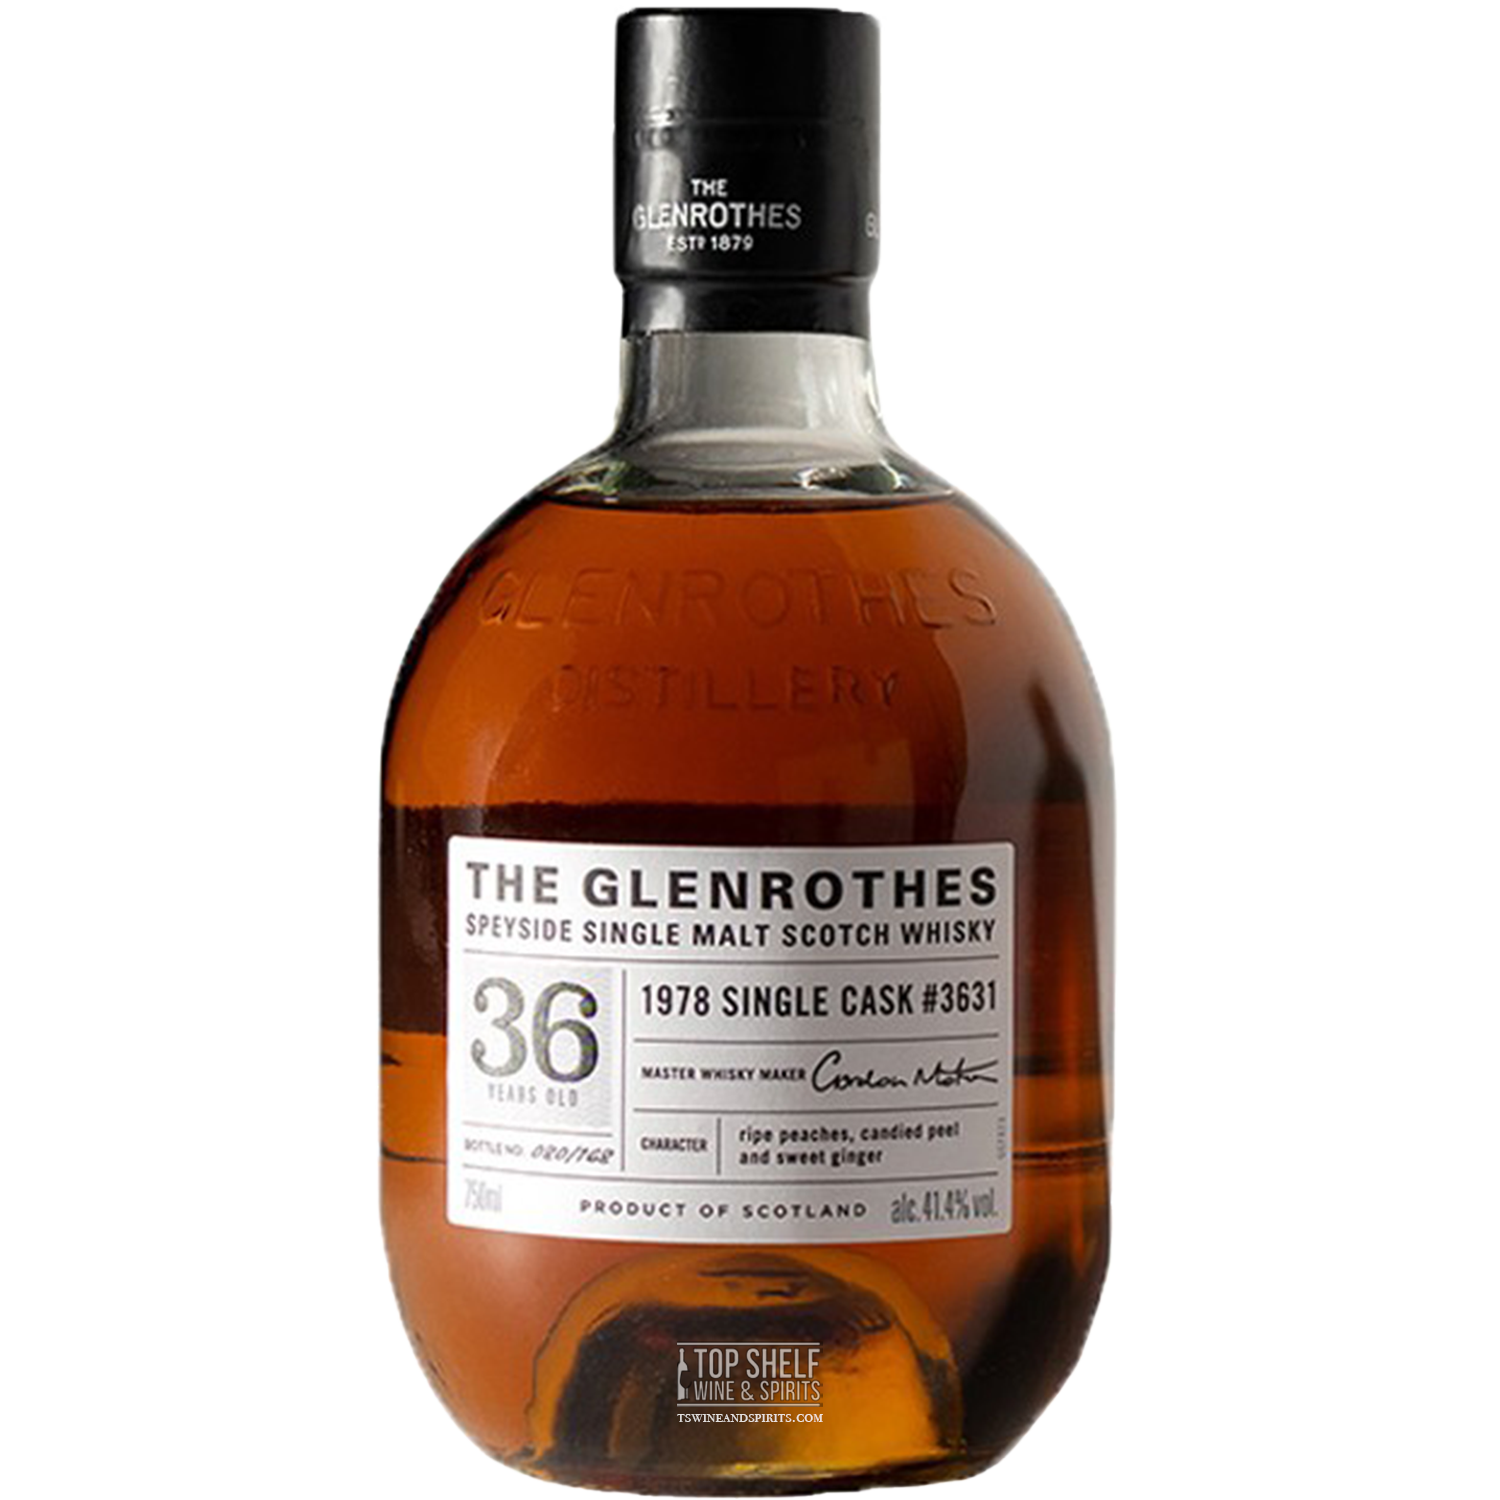 The Glenrothes 1978 Single Cask #3631 36 Year Scotch